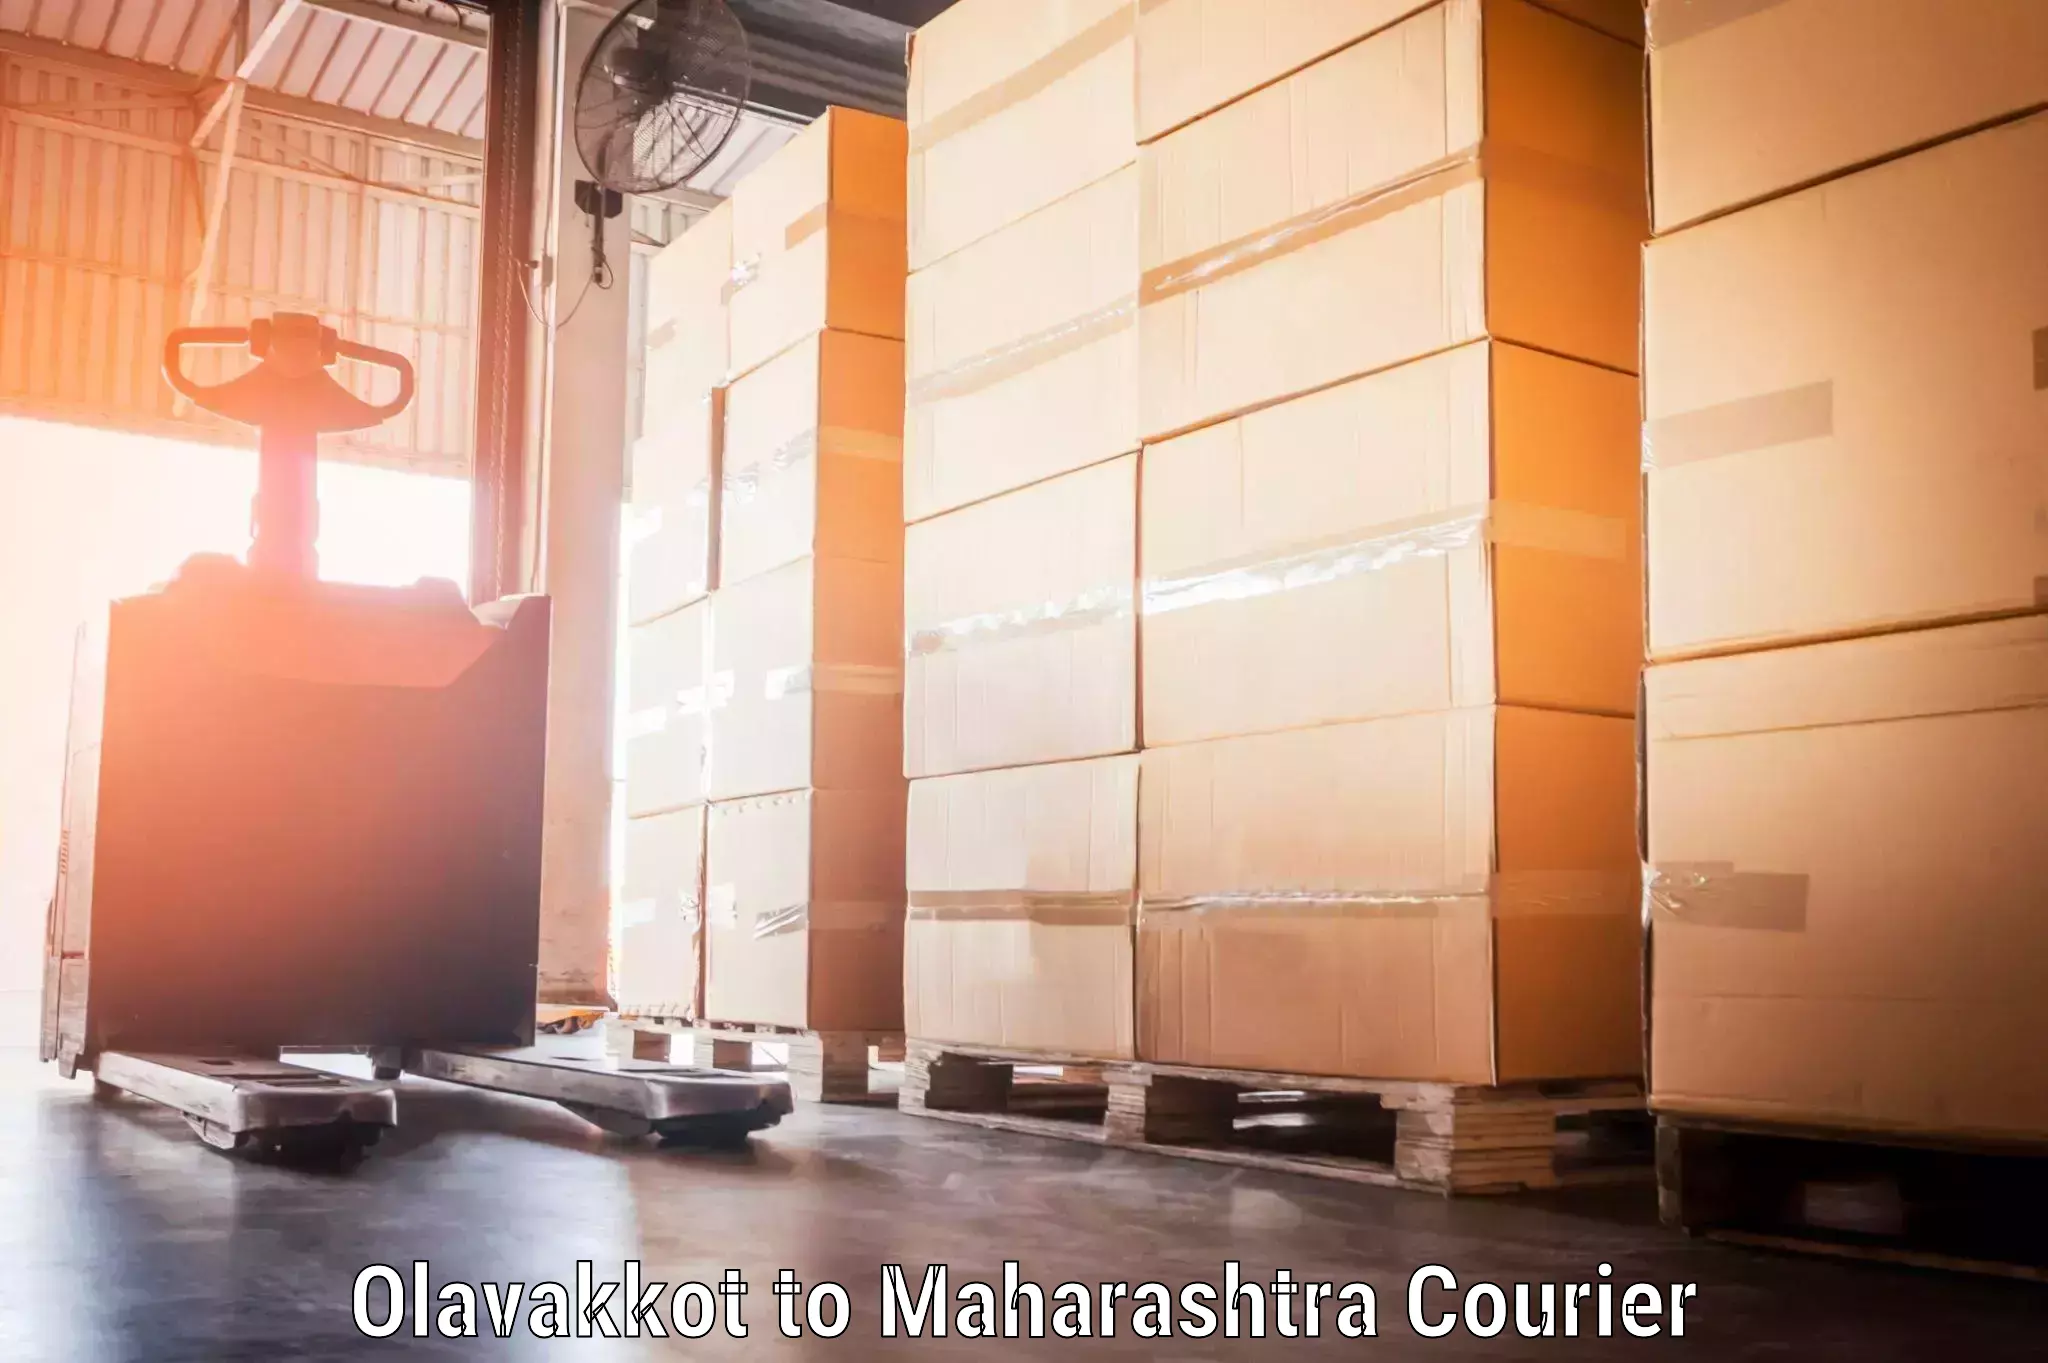 Excess baggage transport in Olavakkot to Maharashtra